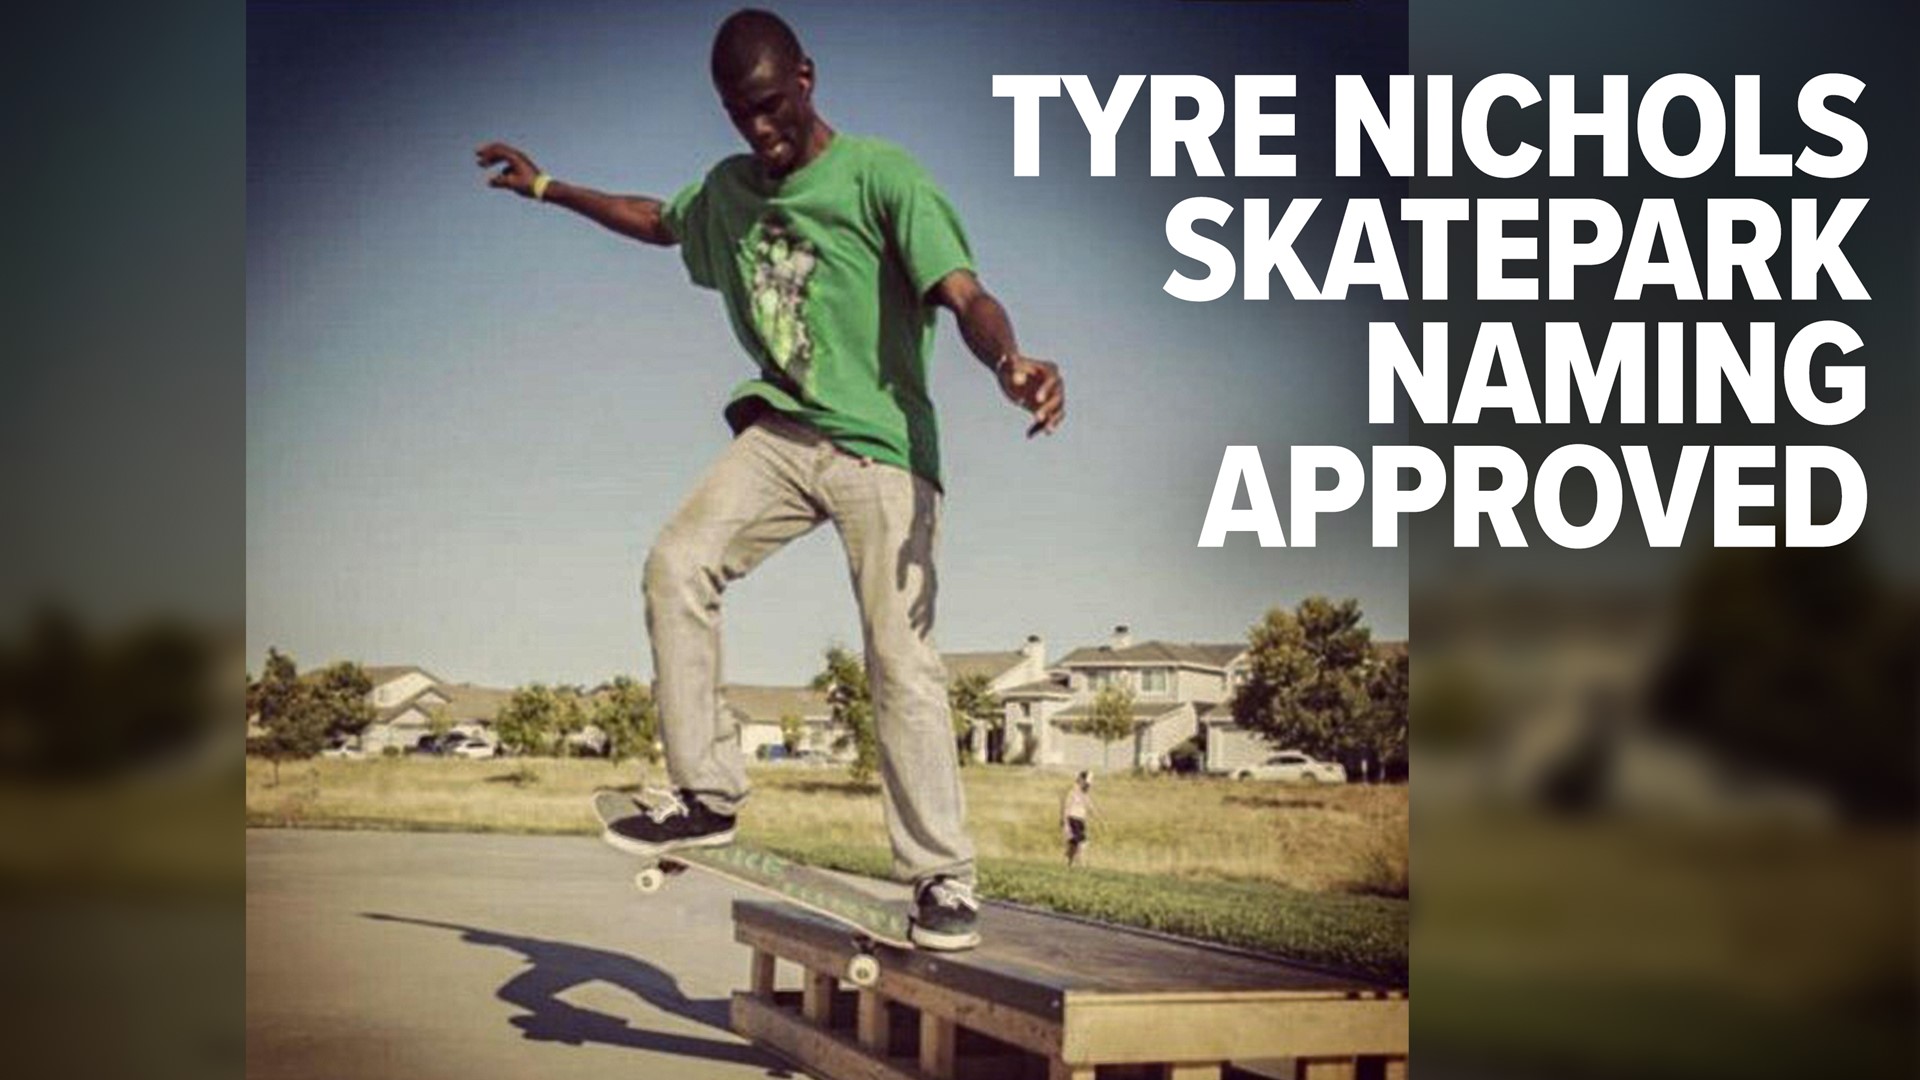 Sacramento City Councilmembers voted unanimously Tuesday to approve naming the skatepark at Regency Community Park after Sacramento native Tyre Nichols.